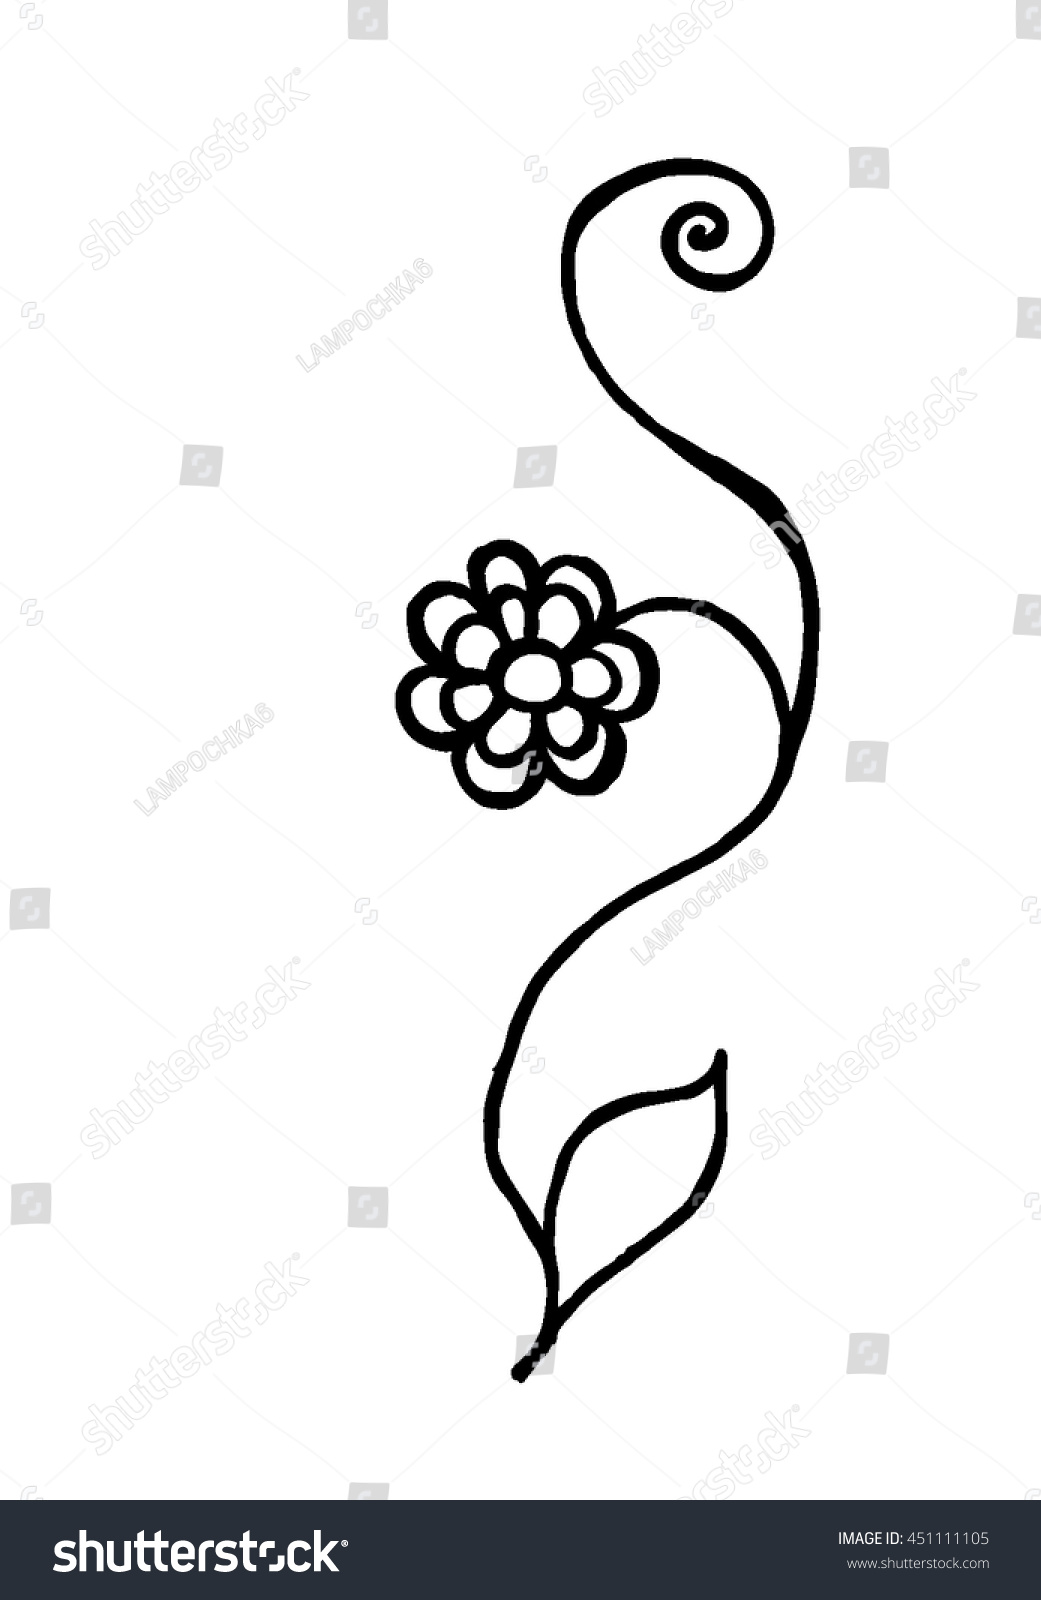 Drawing Black Crayon Doodle Coloring Pages Stock Vector (Royalty Free ...